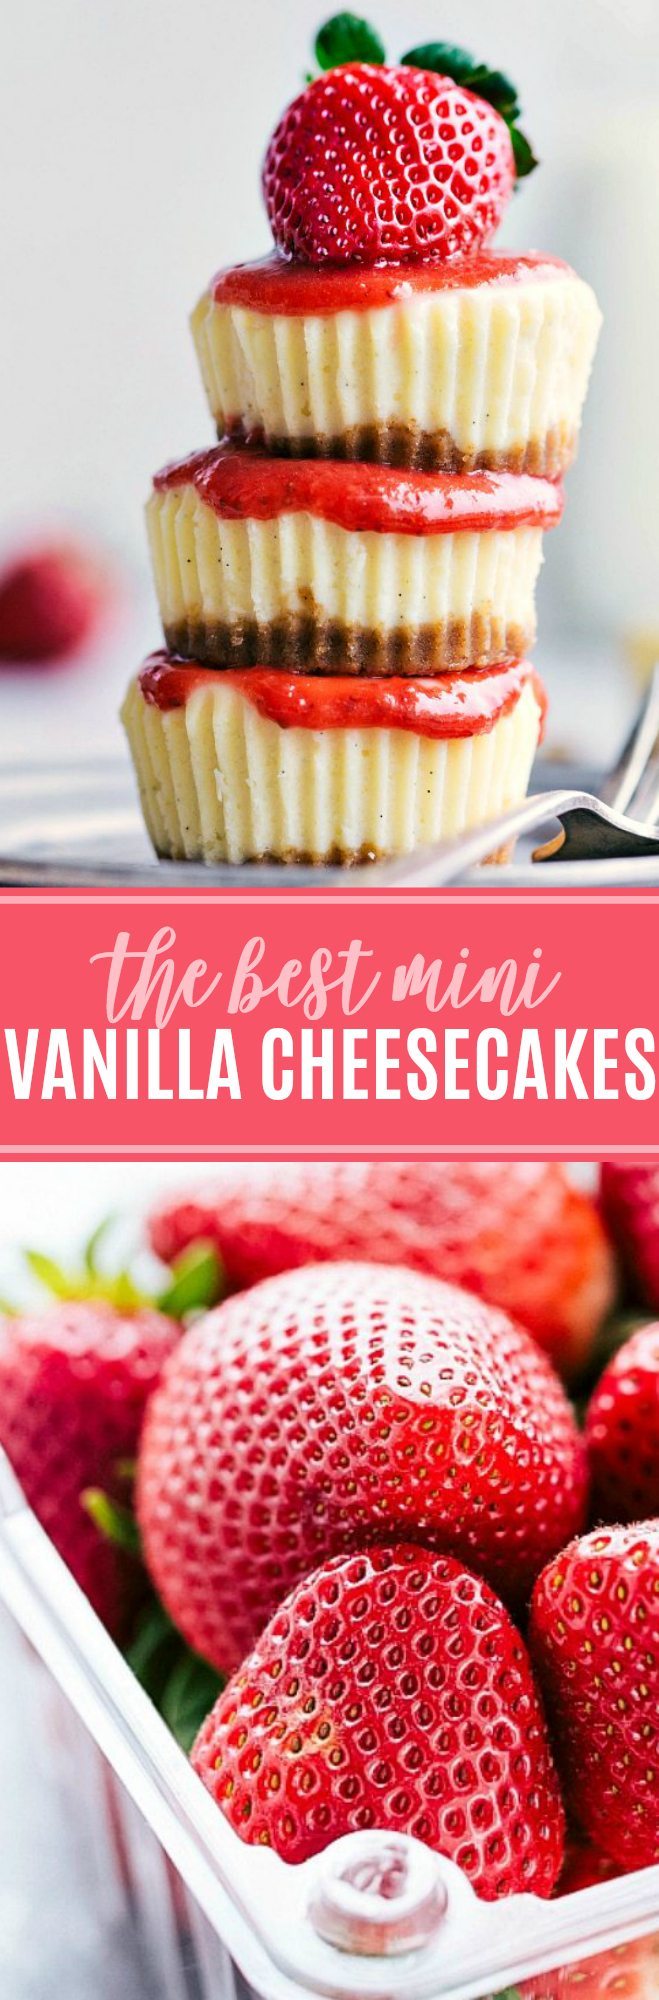 The absolute best mini vanilla cheesecakes with an easy strawberry sauce. | chelseasmessyapron.com | #strawberry #cheesecake #mini #dessert #easy #quick #desserts #best #ever #kidfriendly #cheesecakes #vanilla